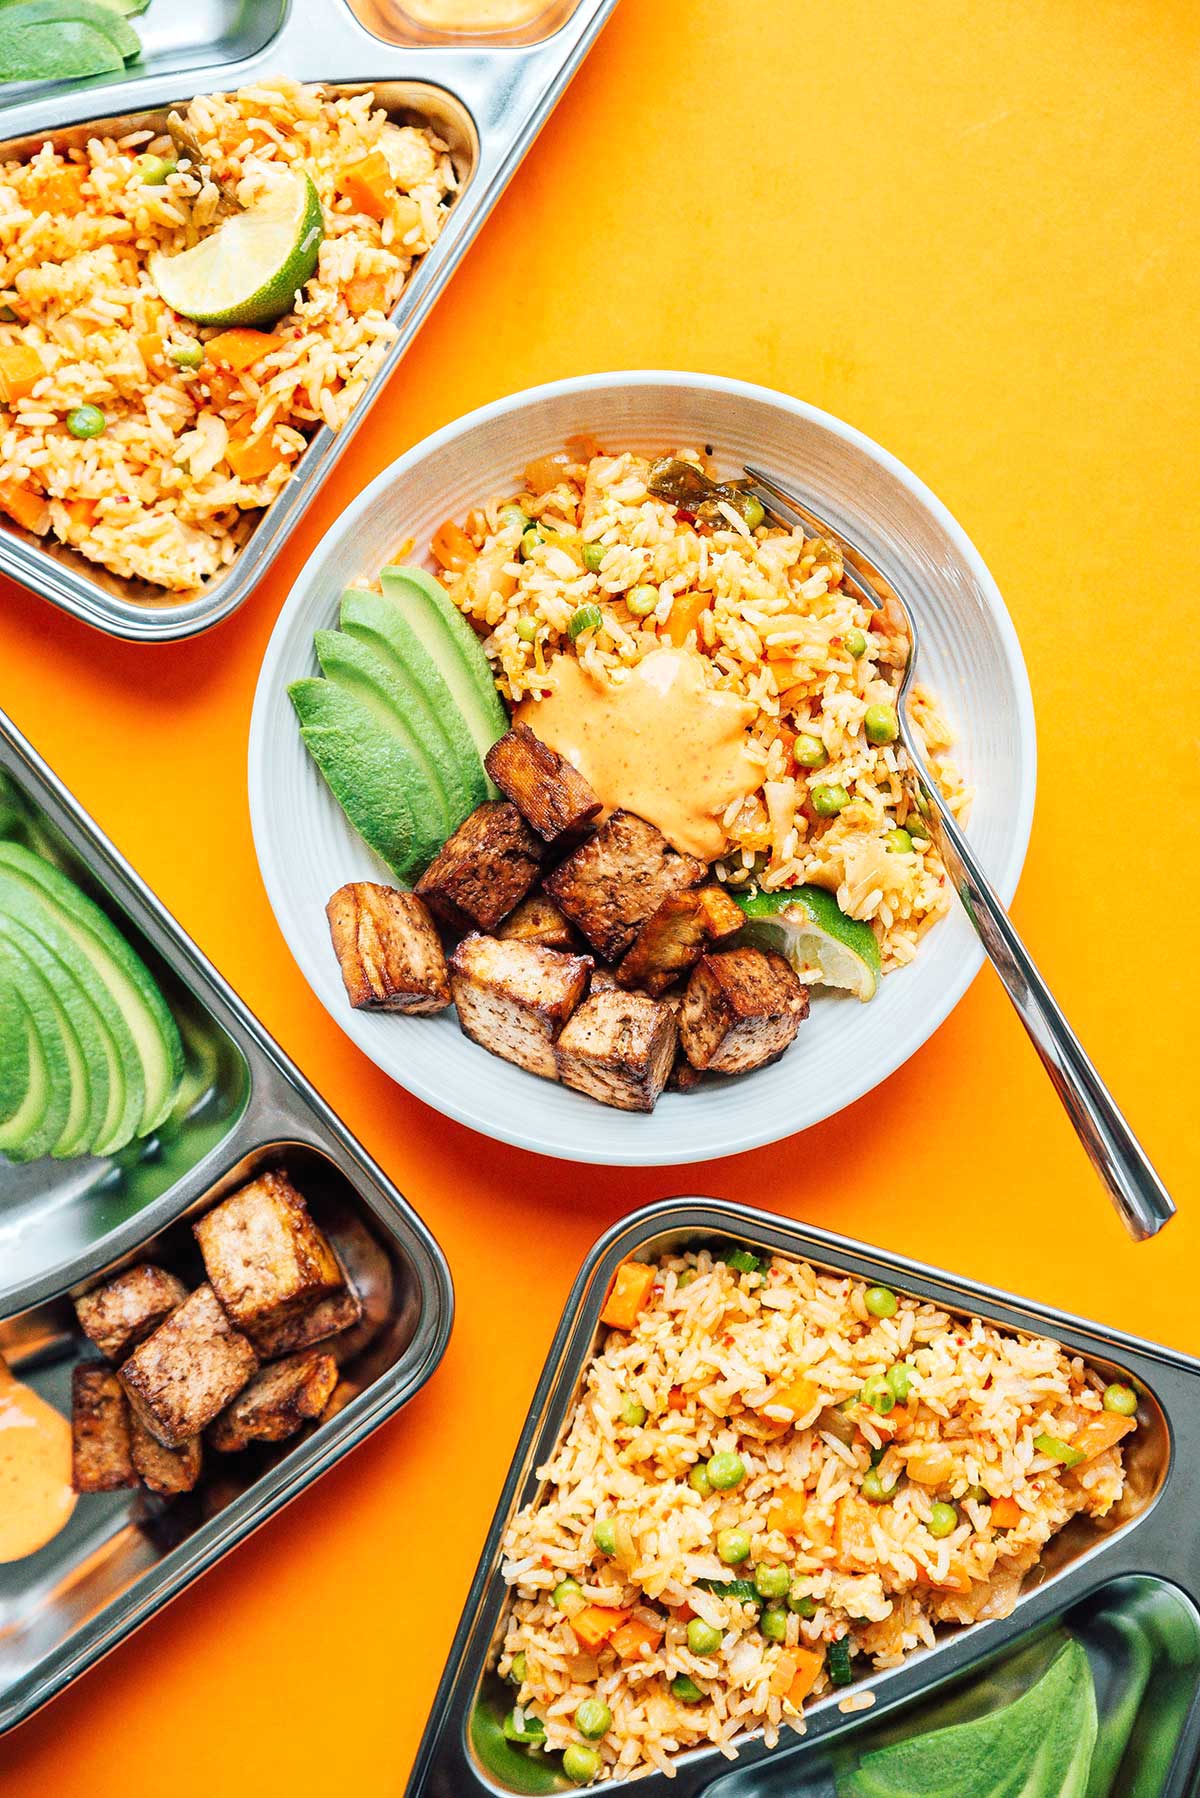 Kimchi fried rice meal prep in various bowls and containers on a yellow background